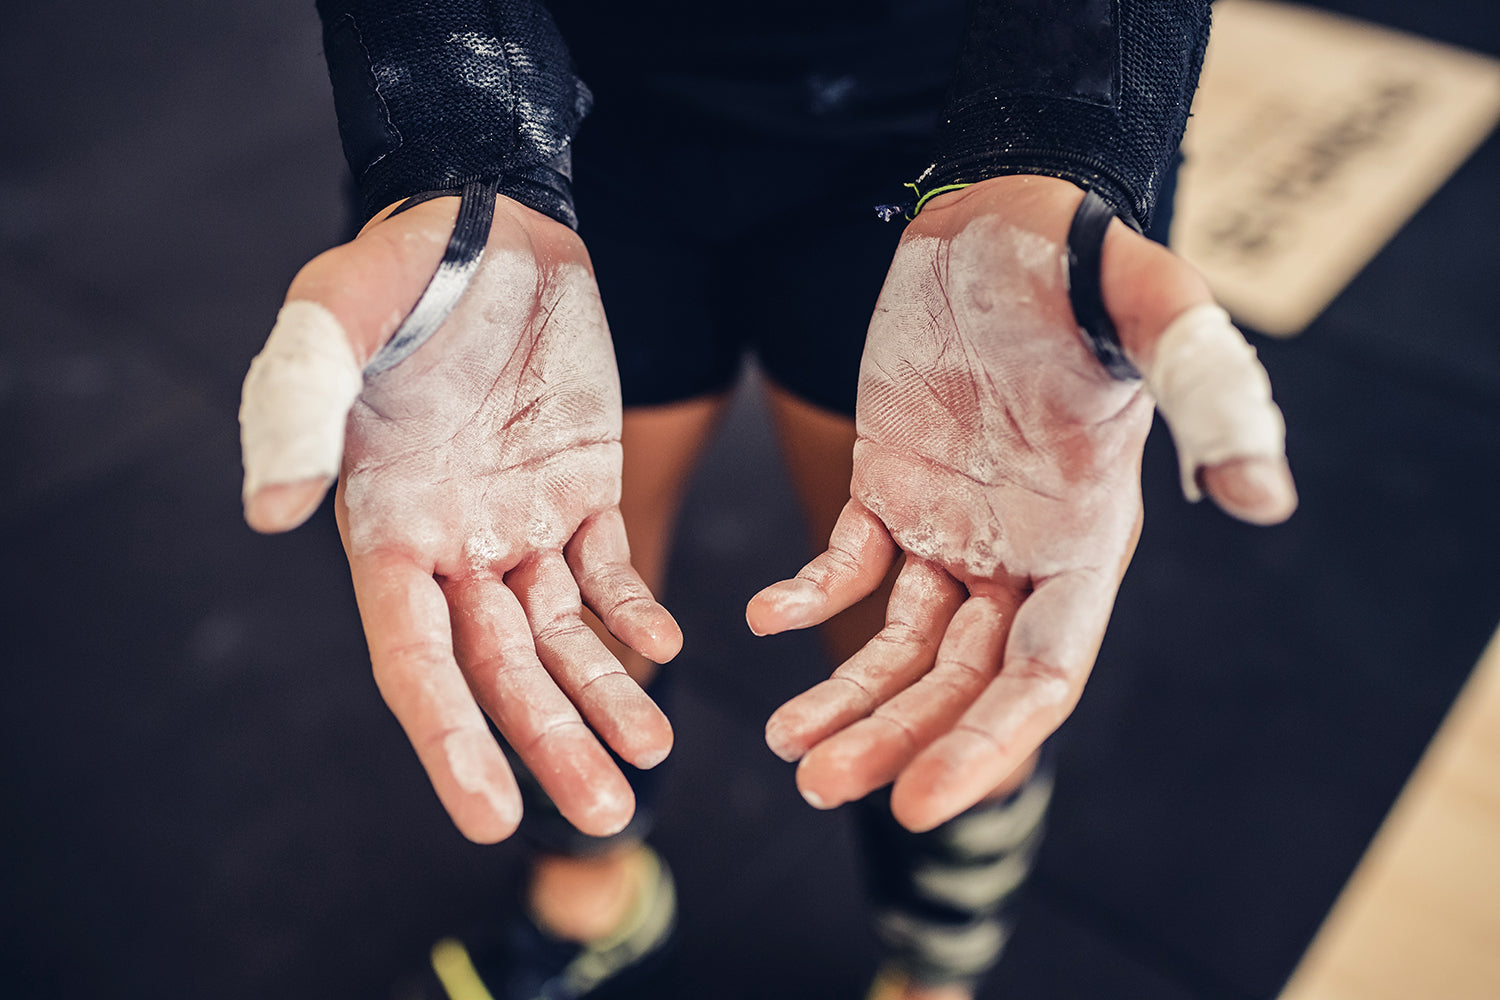 Hand care for calisthenics to prevent torn hands